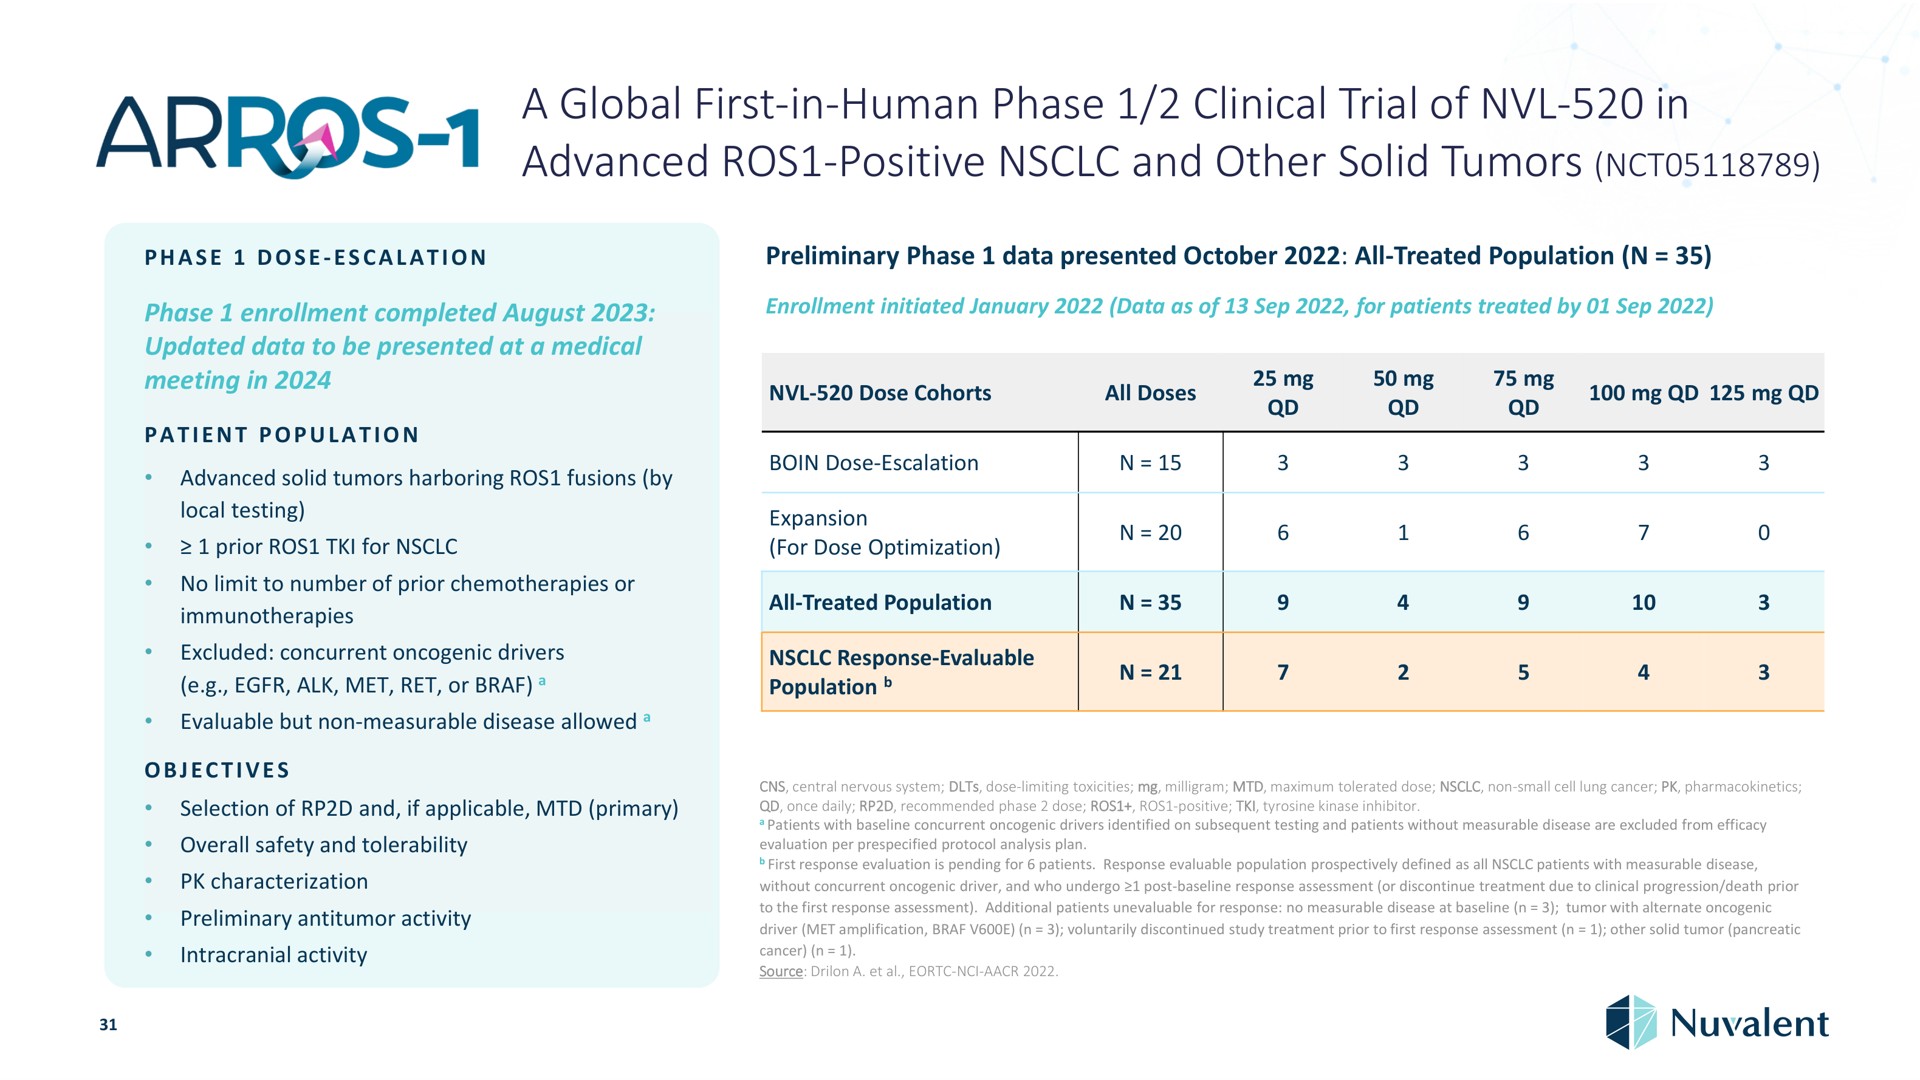 a global first in human phase clinical trial of in advanced positive and other solid tumors dose preliminary data presented all treated population enrollment completed august updated data to be presented at medical meeting patient population harboring fusions by local testing prior for no limit to number prior chemotherapies or excluded concurrent drivers alk met ret or evaluable but non measurable disease allowed objectives enrollment initiated data as for patients treated by dose cohorts all doses dose expansion for dose optimization tit all treated population response evaluable population selection if applicable primary overall safety tolerability characterization preliminary activity intracranial activity central nervous system dose limiting toxicities milligram maximum tolerated dose non small cell lung cancer once daily recommended dose tyrosine kinase inhibitor patients with concurrent drivers identified on subsequent testing patients without measurable disease are excluded from efficacy evaluation per protocol analysis plan first response evaluation is pending for patients response evaluable population prospectively defined as all patients with measurable disease without concurrent driver who undergo post response assessment or discontinue treatment due to progression death prior to the first response assessment additional patients for response no measurable disease at tumor with alternate driver met amplification voluntarily discontinued study treatment prior to first response assessment tumor pancreatic cancer source | Nuvalent